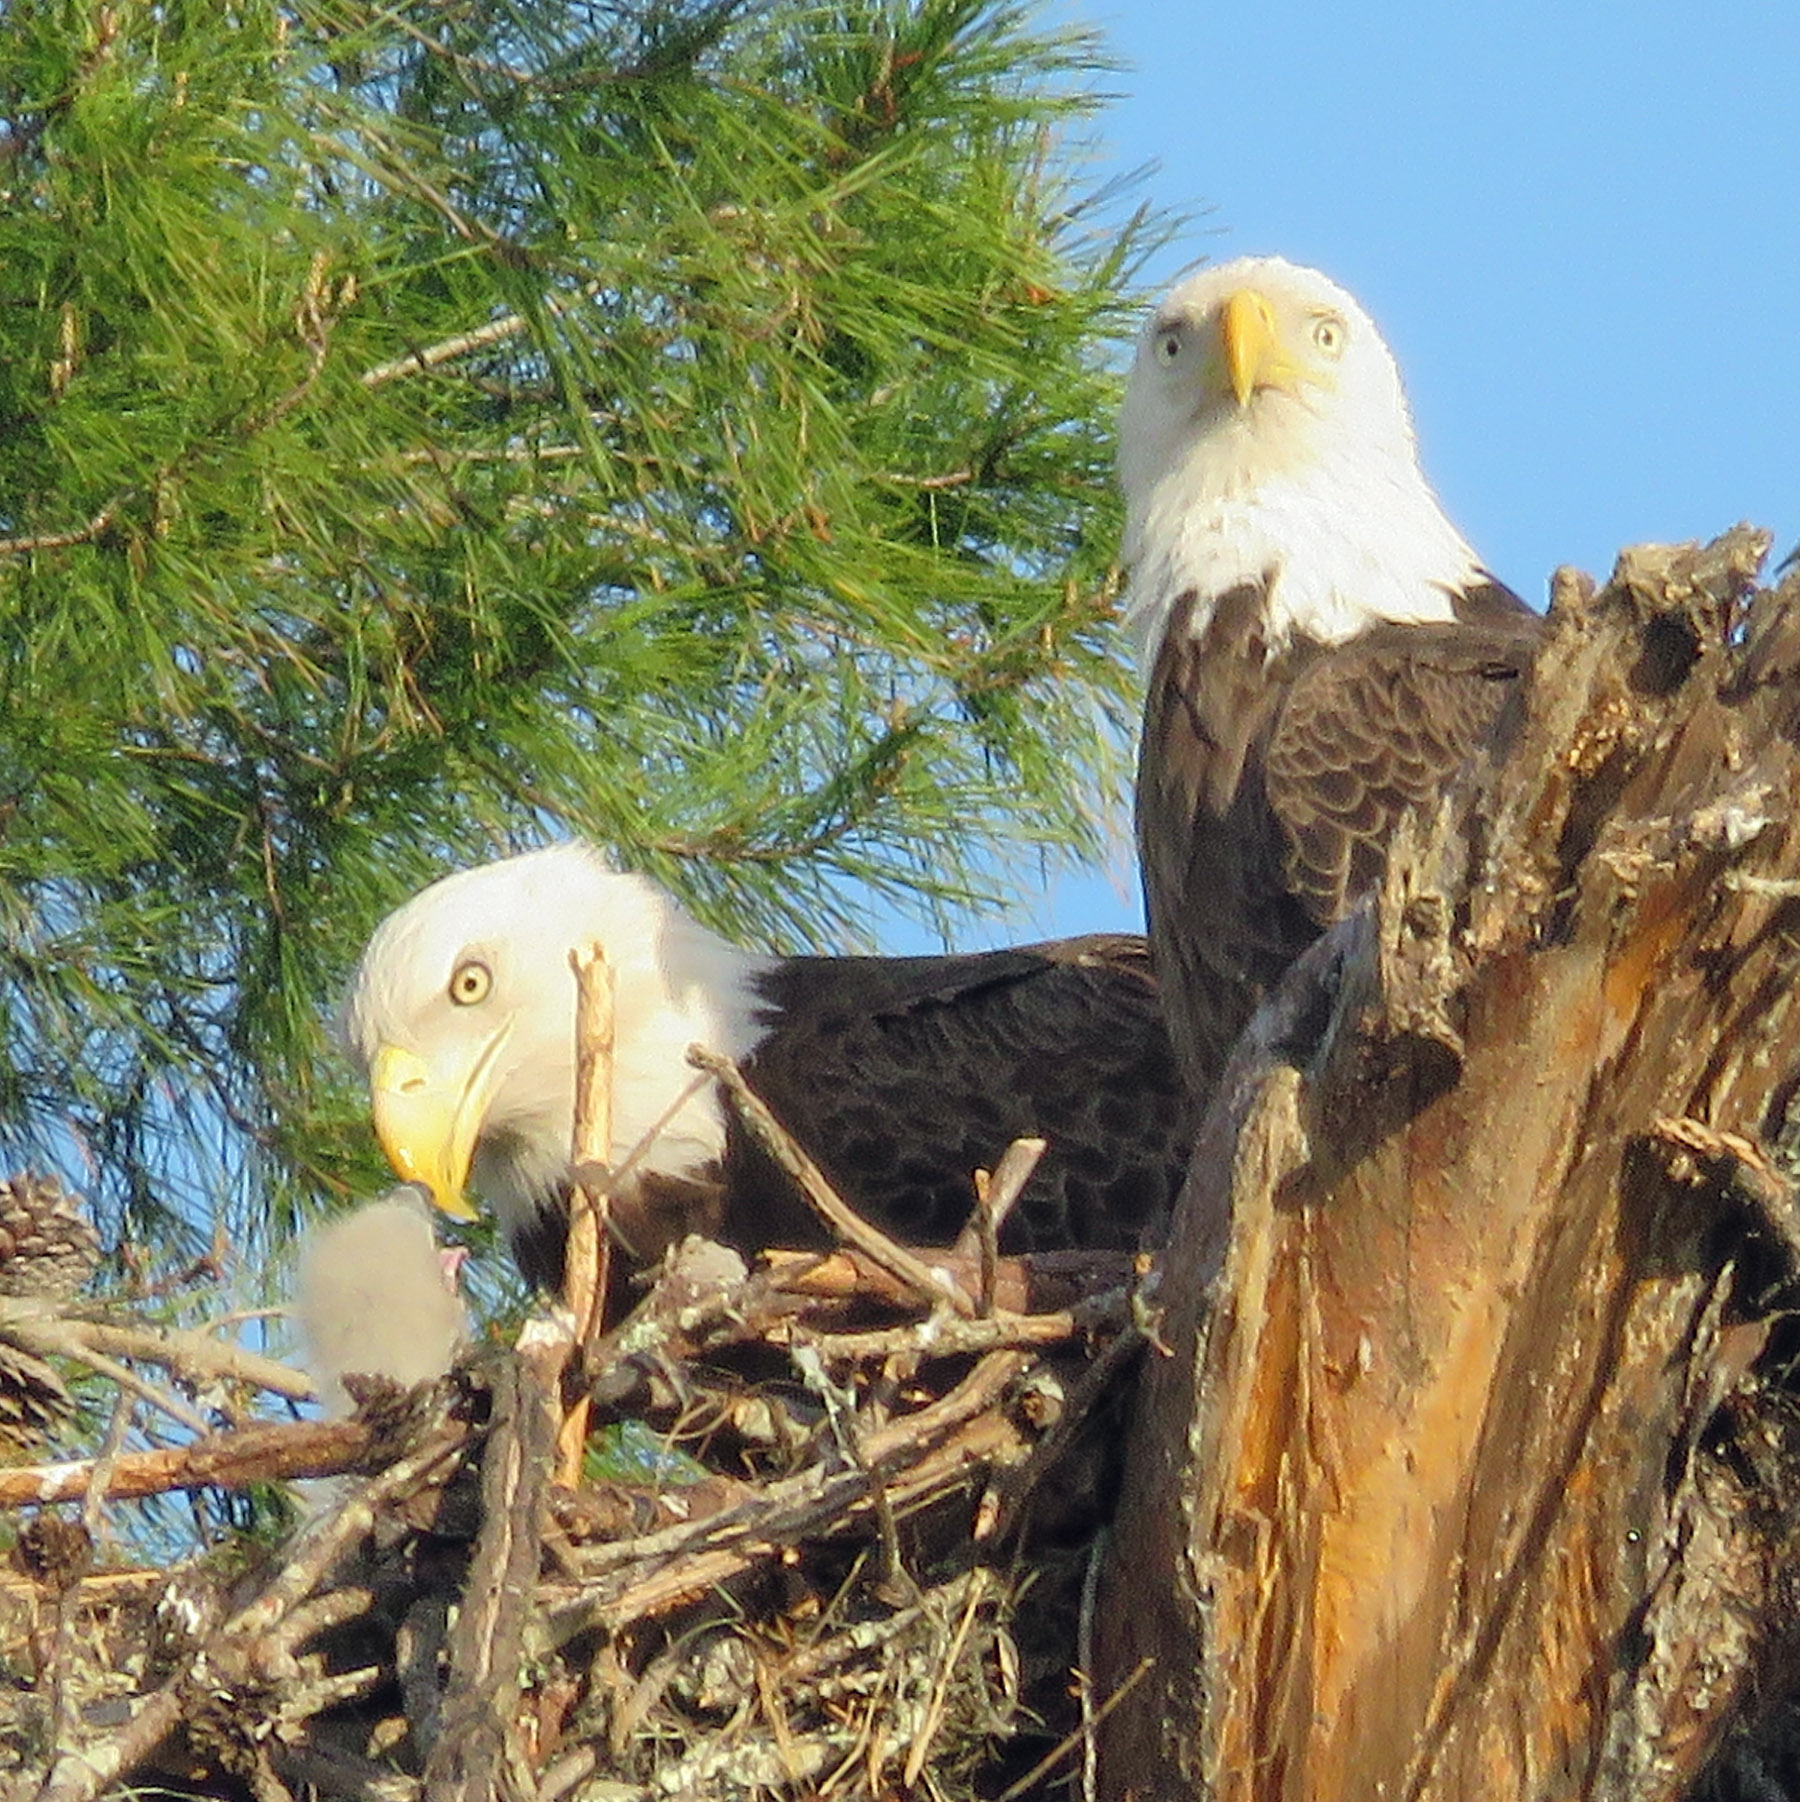 Nesting bald eagle family of two adults and one chick at Tiger Creek Preserve. 